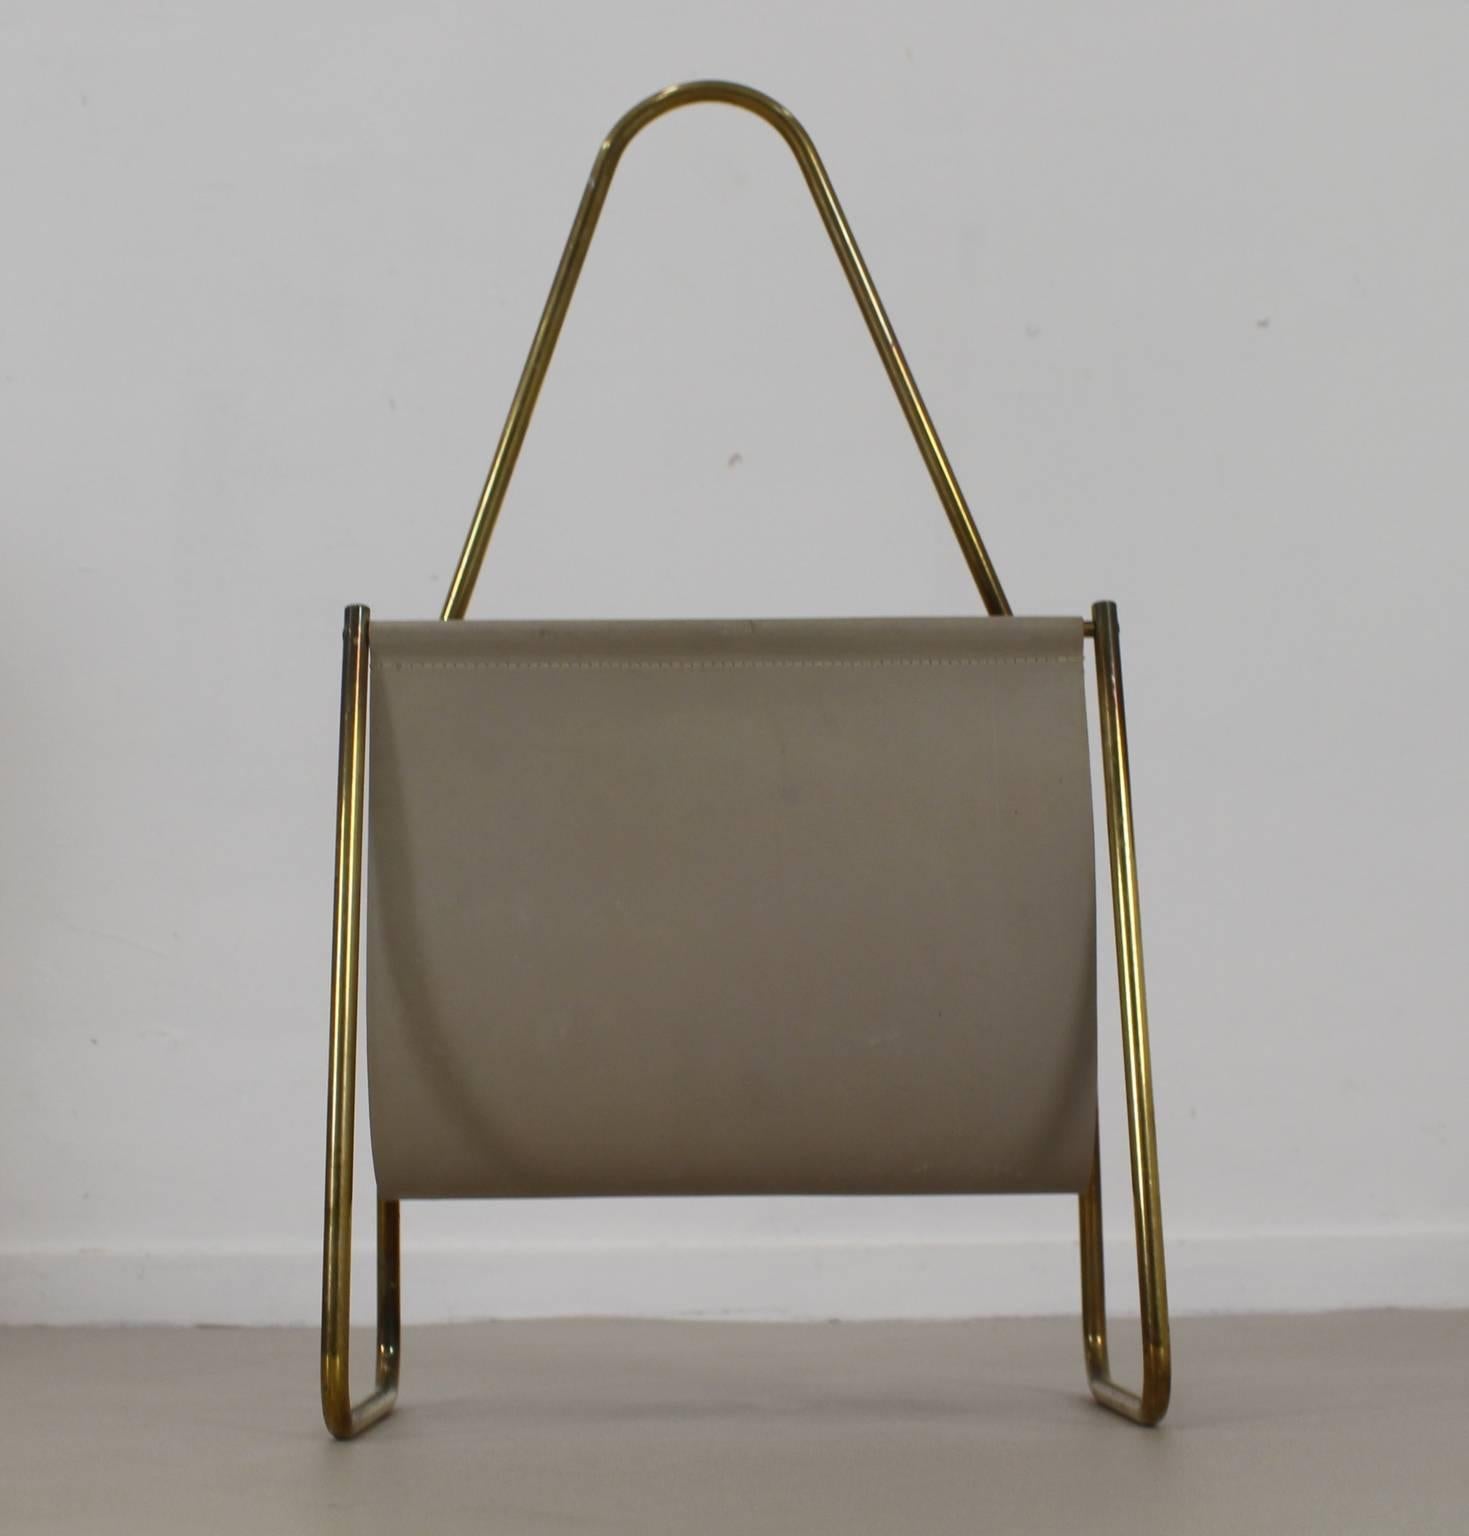 Massive brass metal frame.
Leather bag in excellent condition.
Produced by Carl Auböck Werkstätte Vienna.